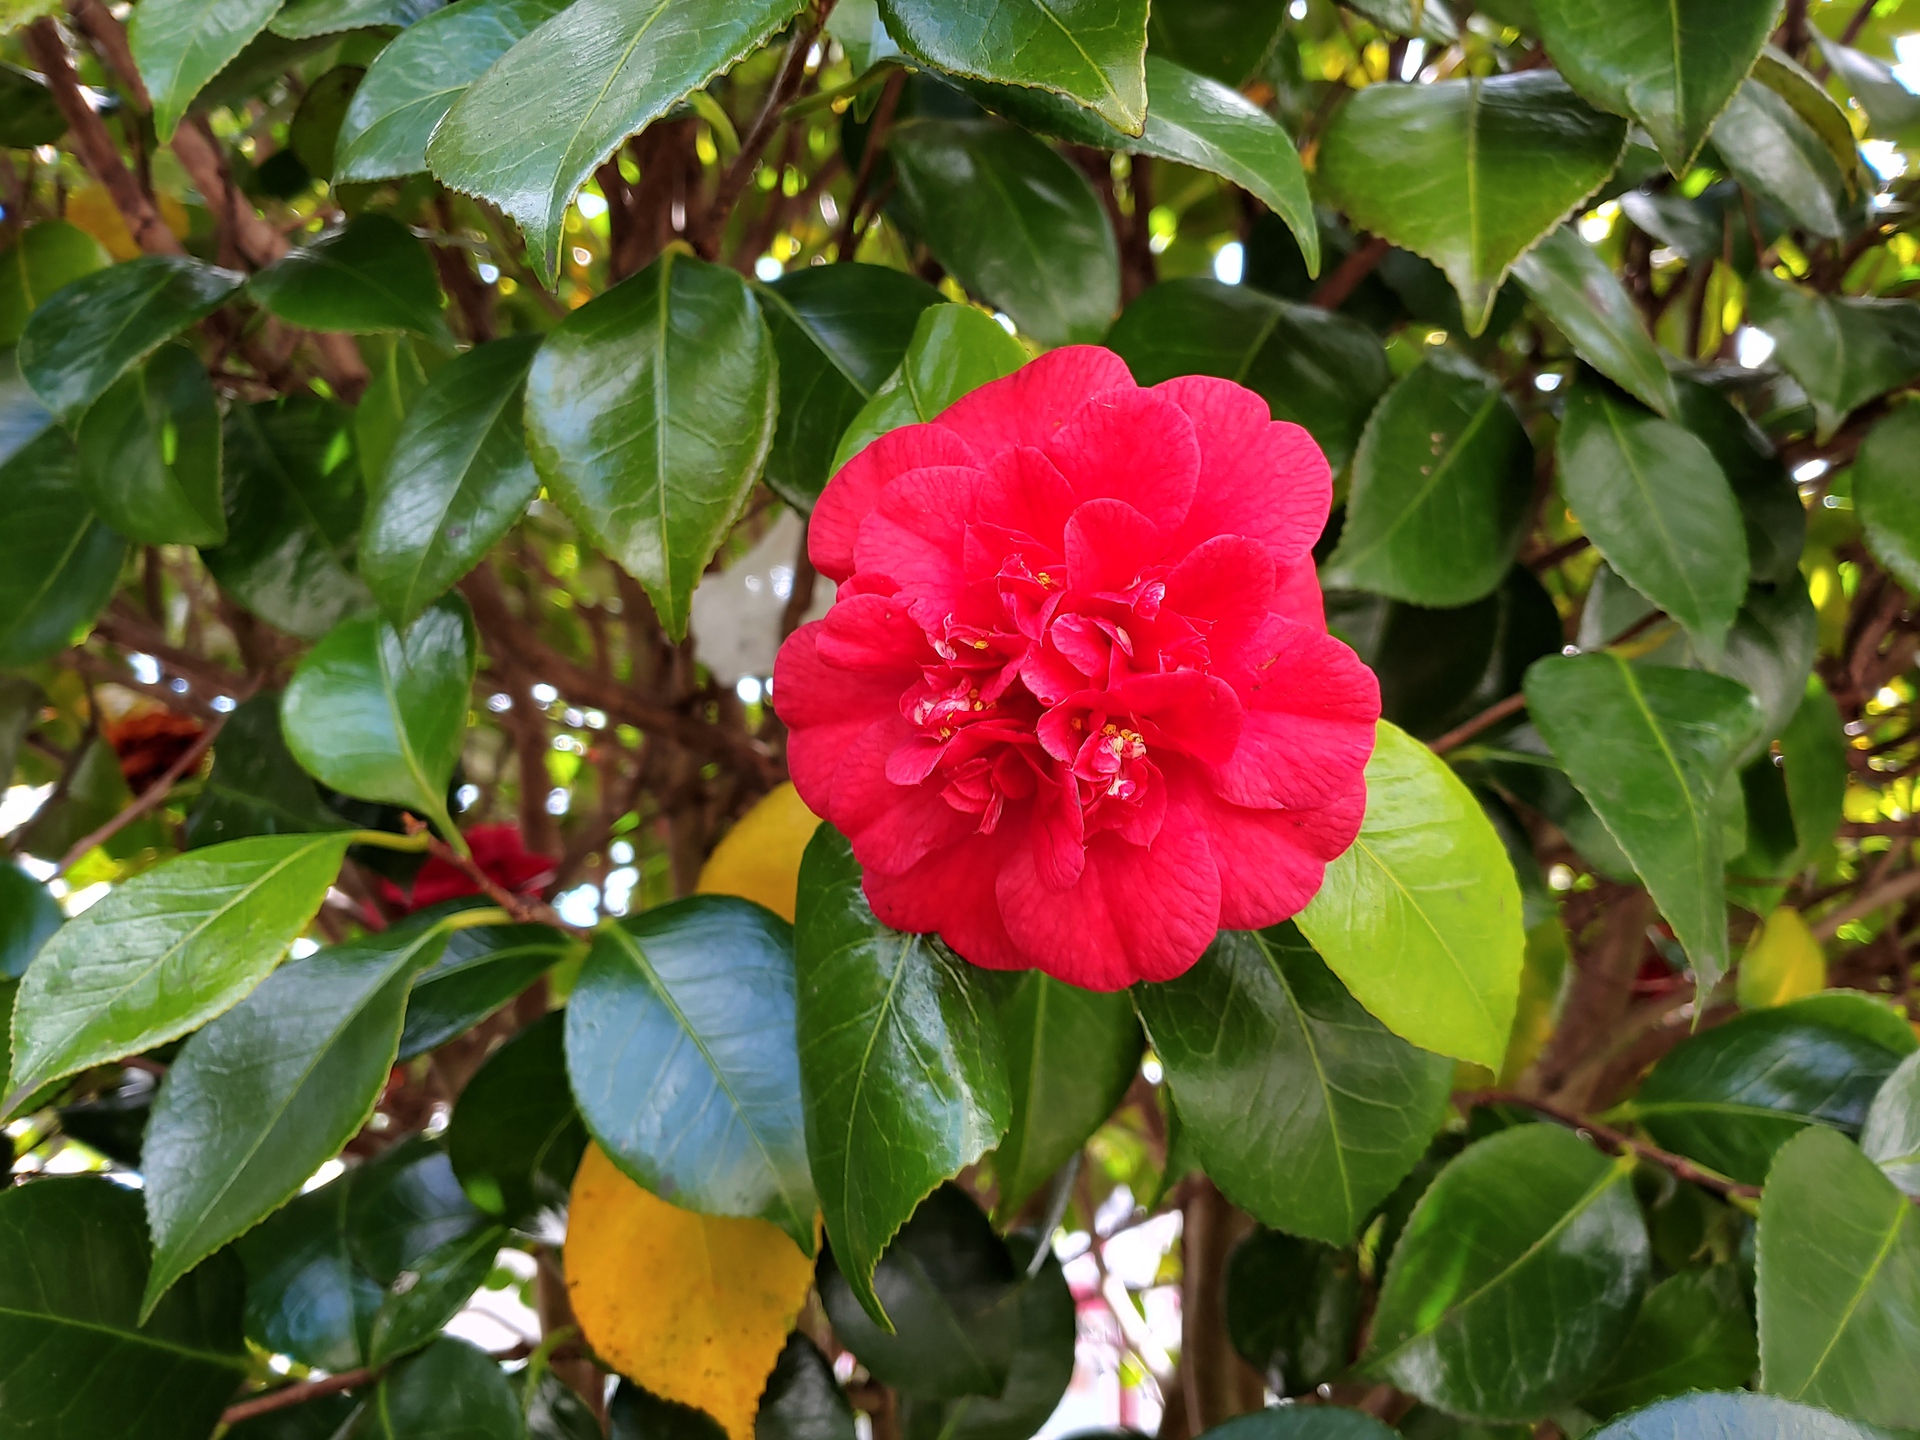 LG V40 ThinQ camera sample colorful red flower